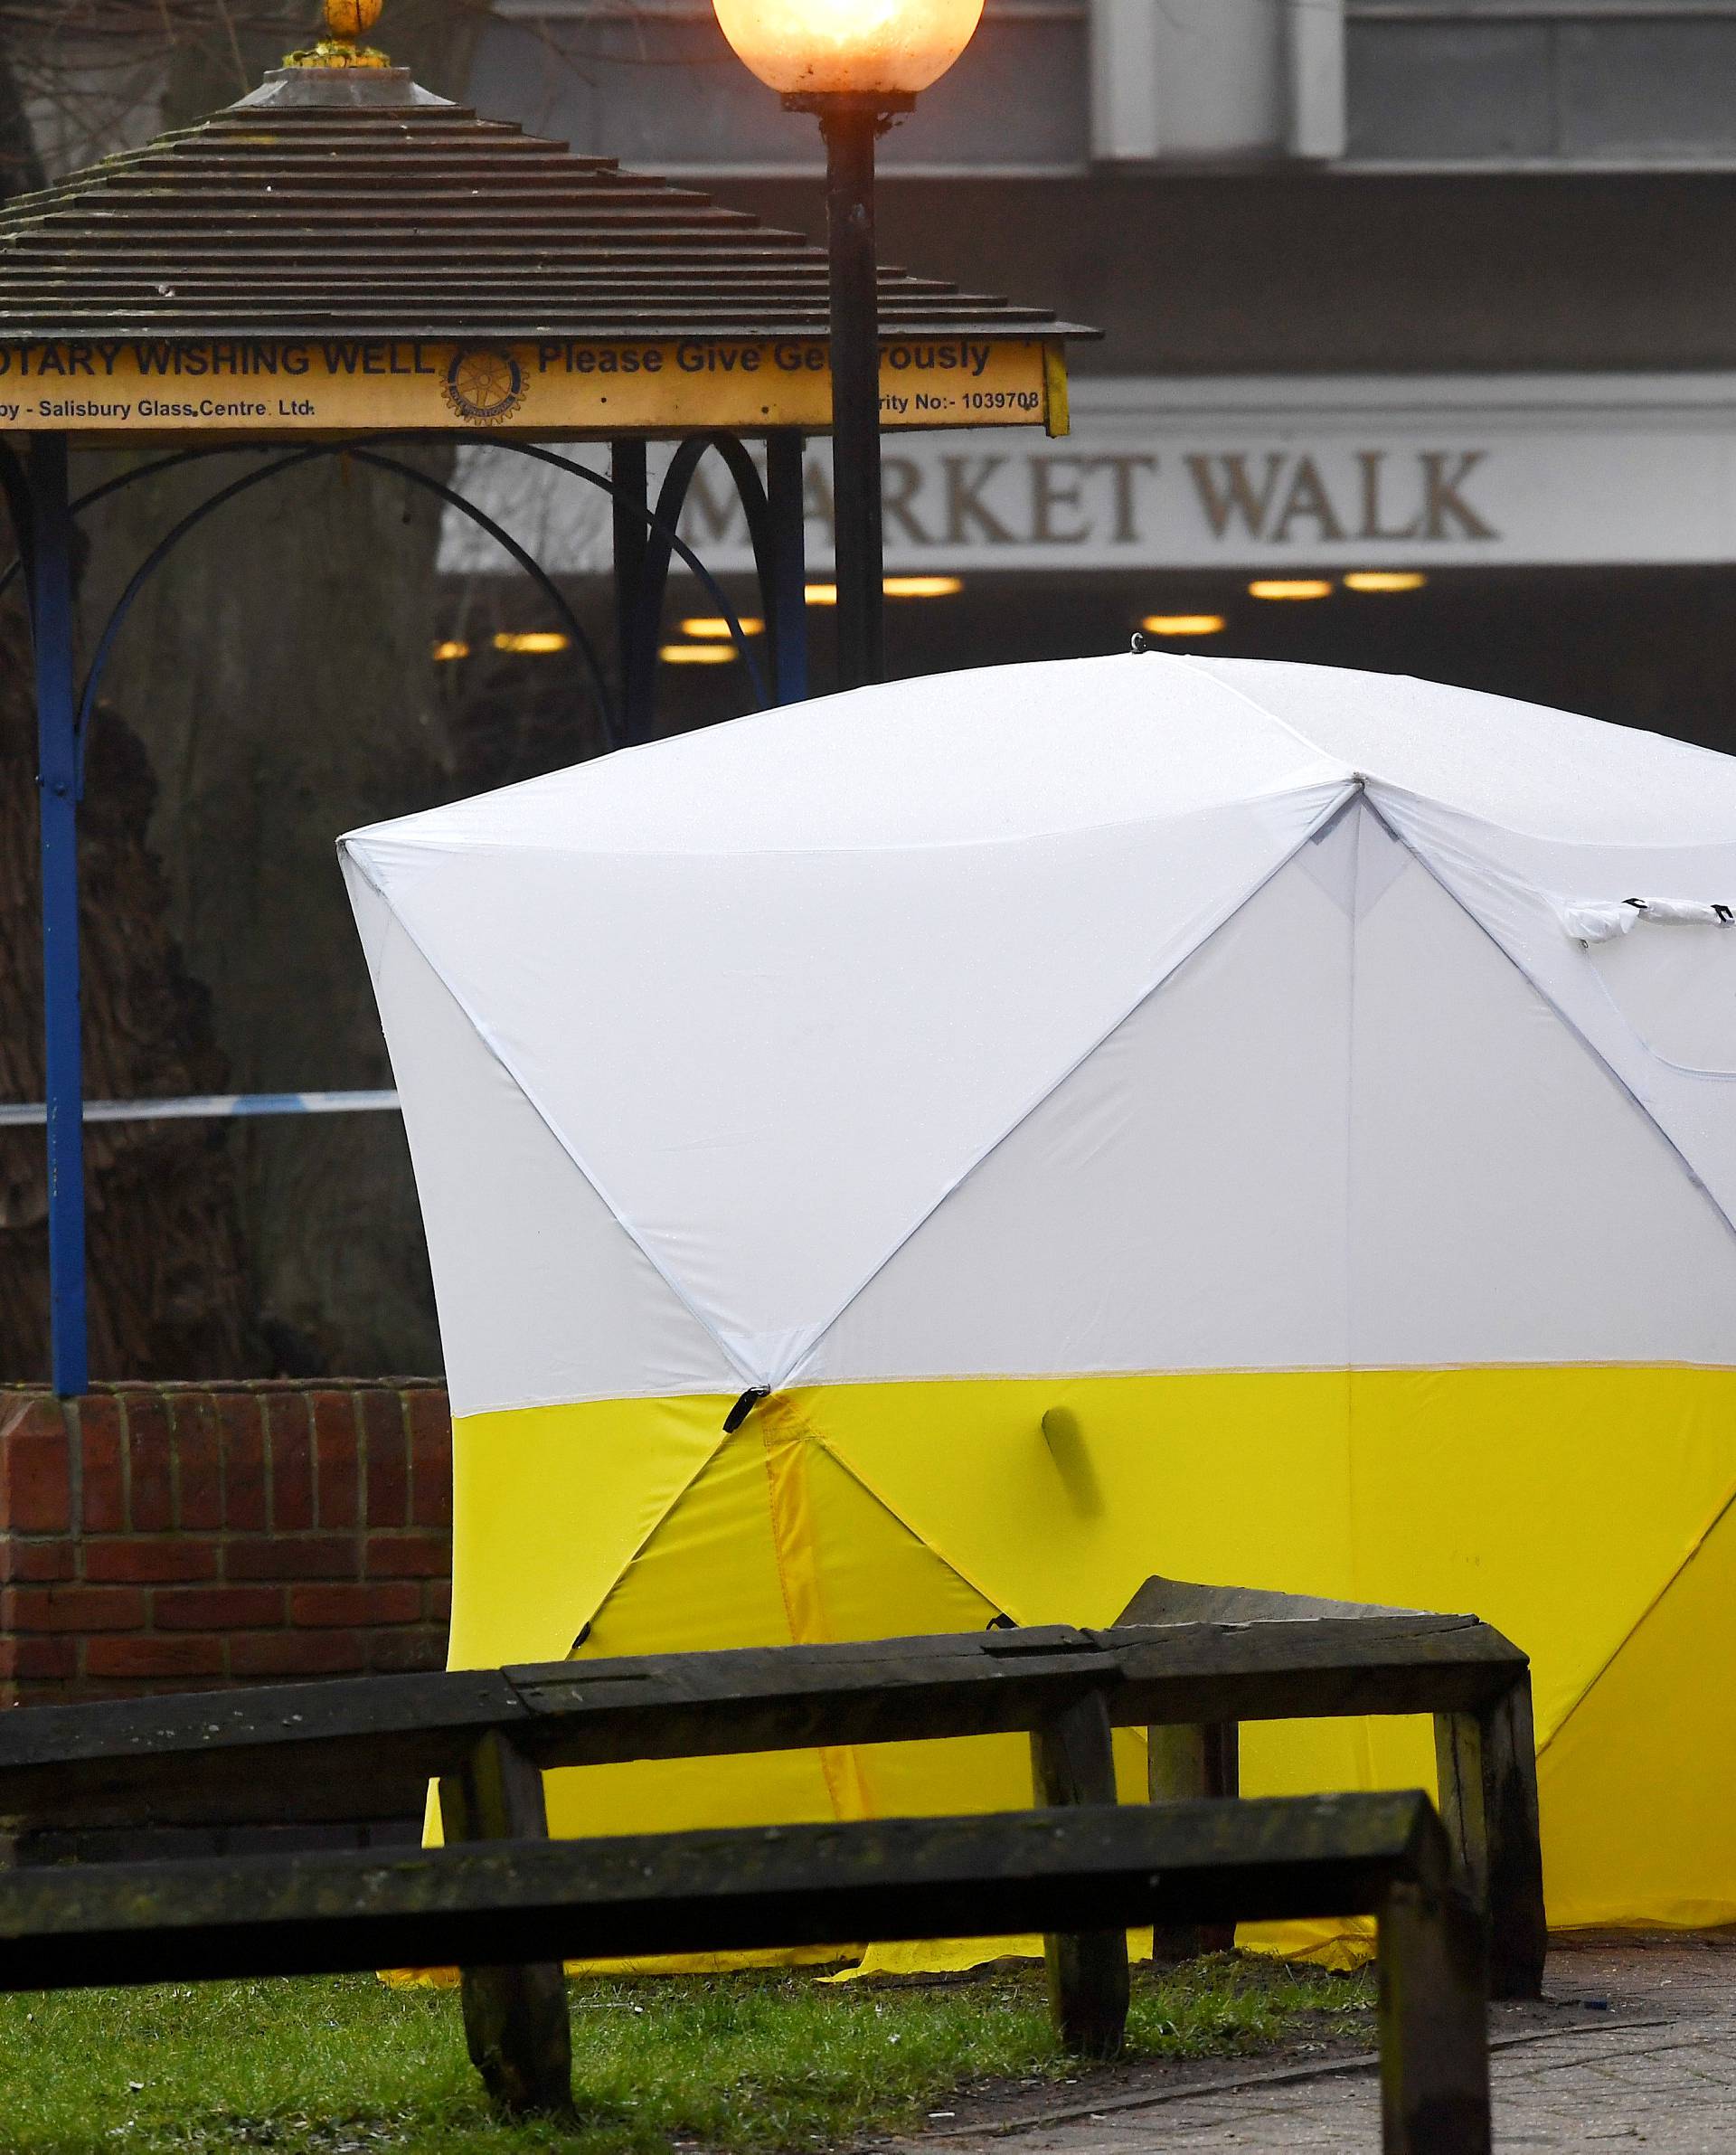 Police officers stand at crime scene tape, as a tent covers a park bench on which former Russian inteligence officer Sergei Skripal, and a woman were found unconscious after they had been exposed to an unknown substance, in Salisbury